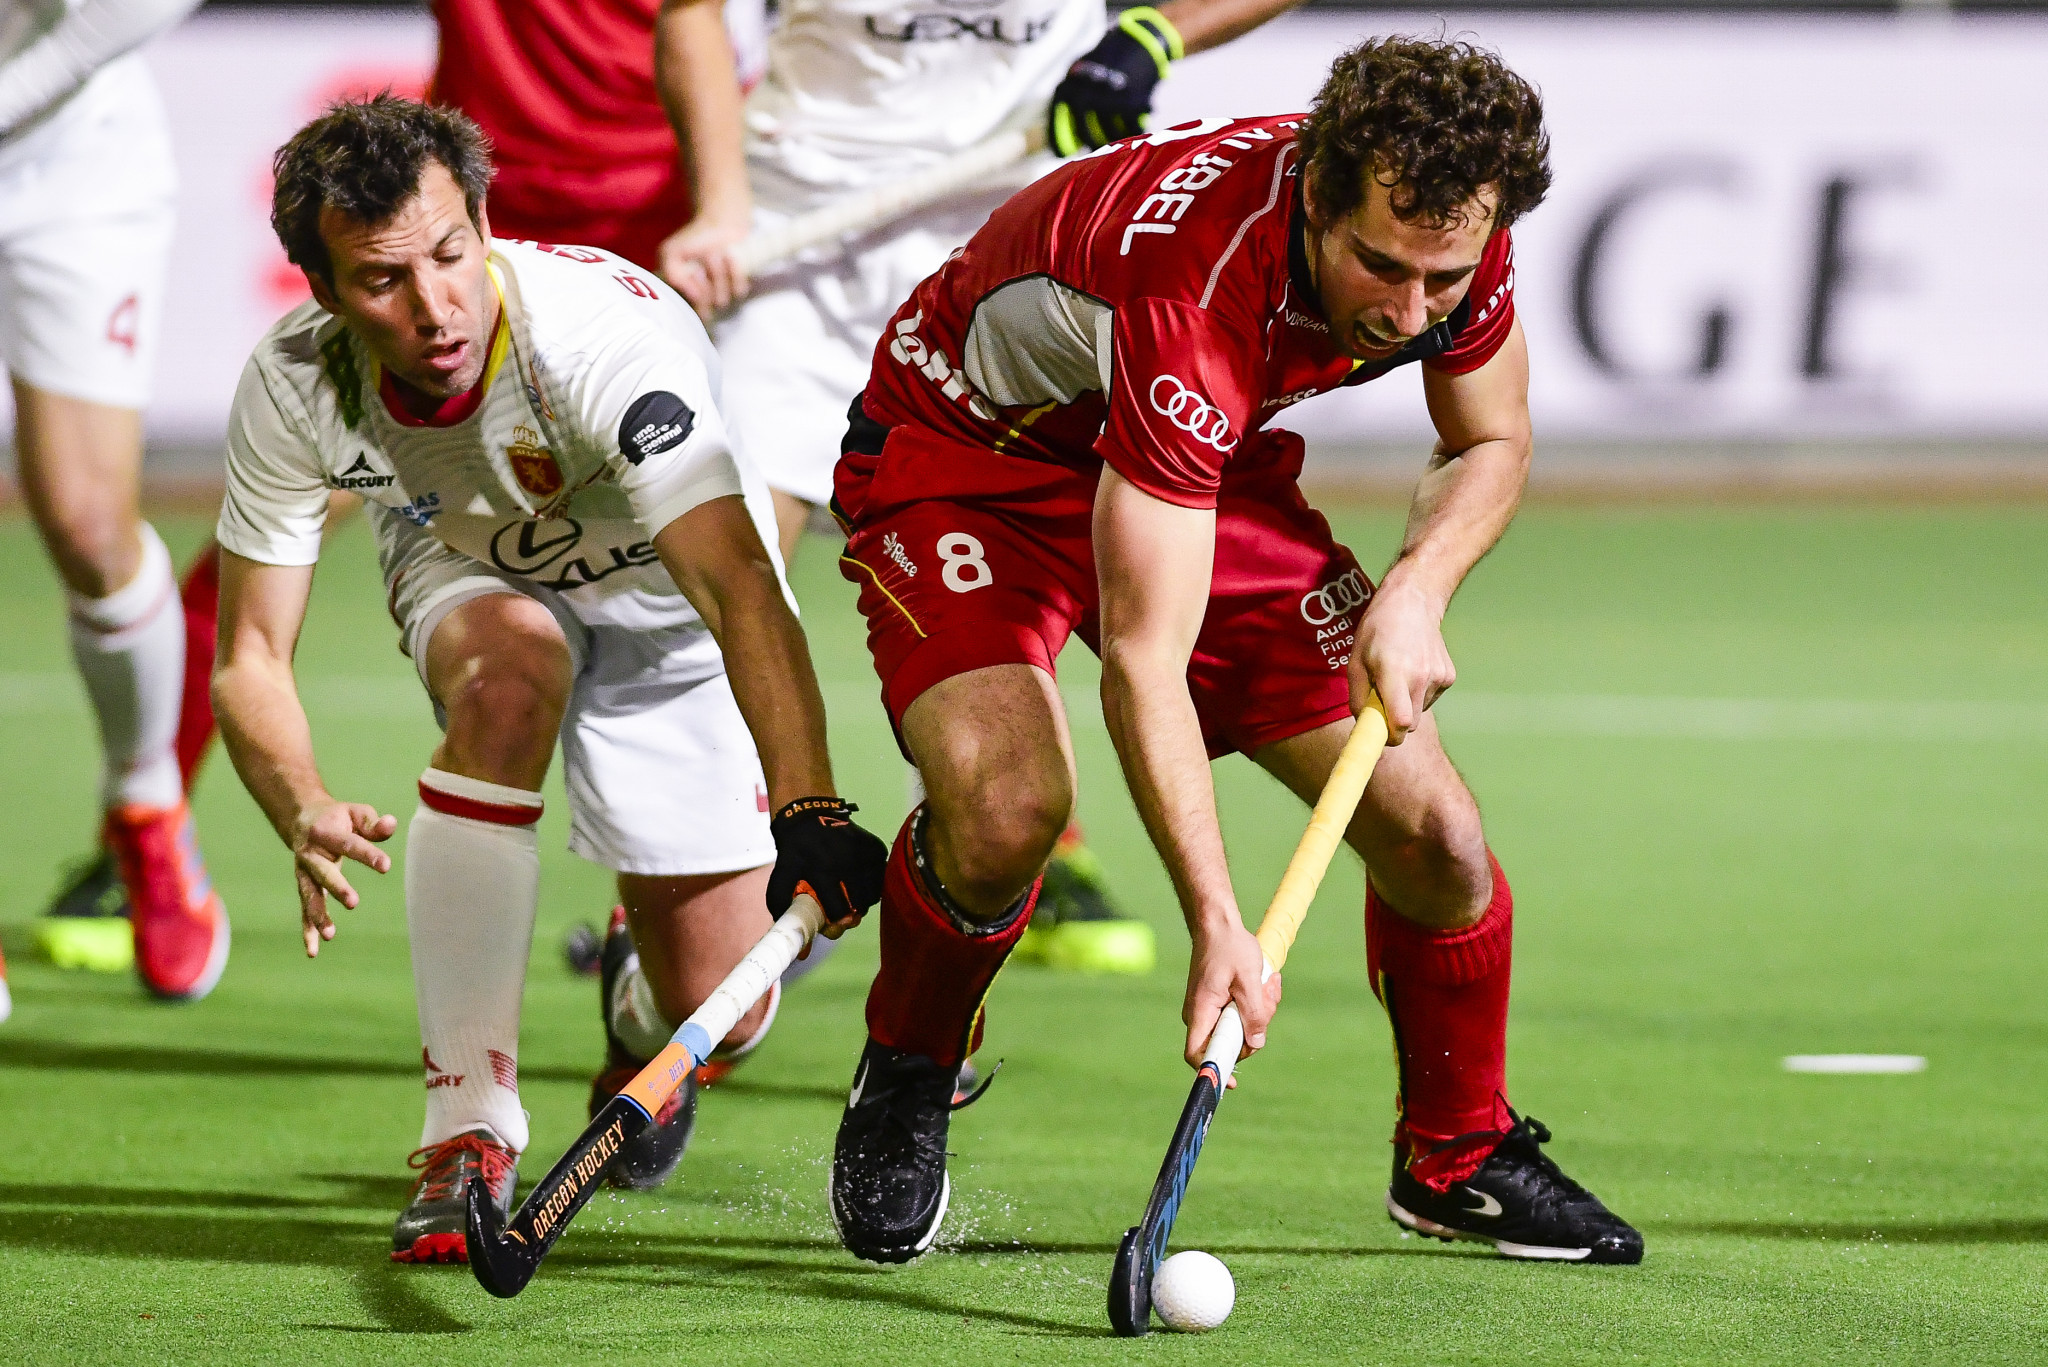 FIH announces improvements to anti-doping system on Play True Day